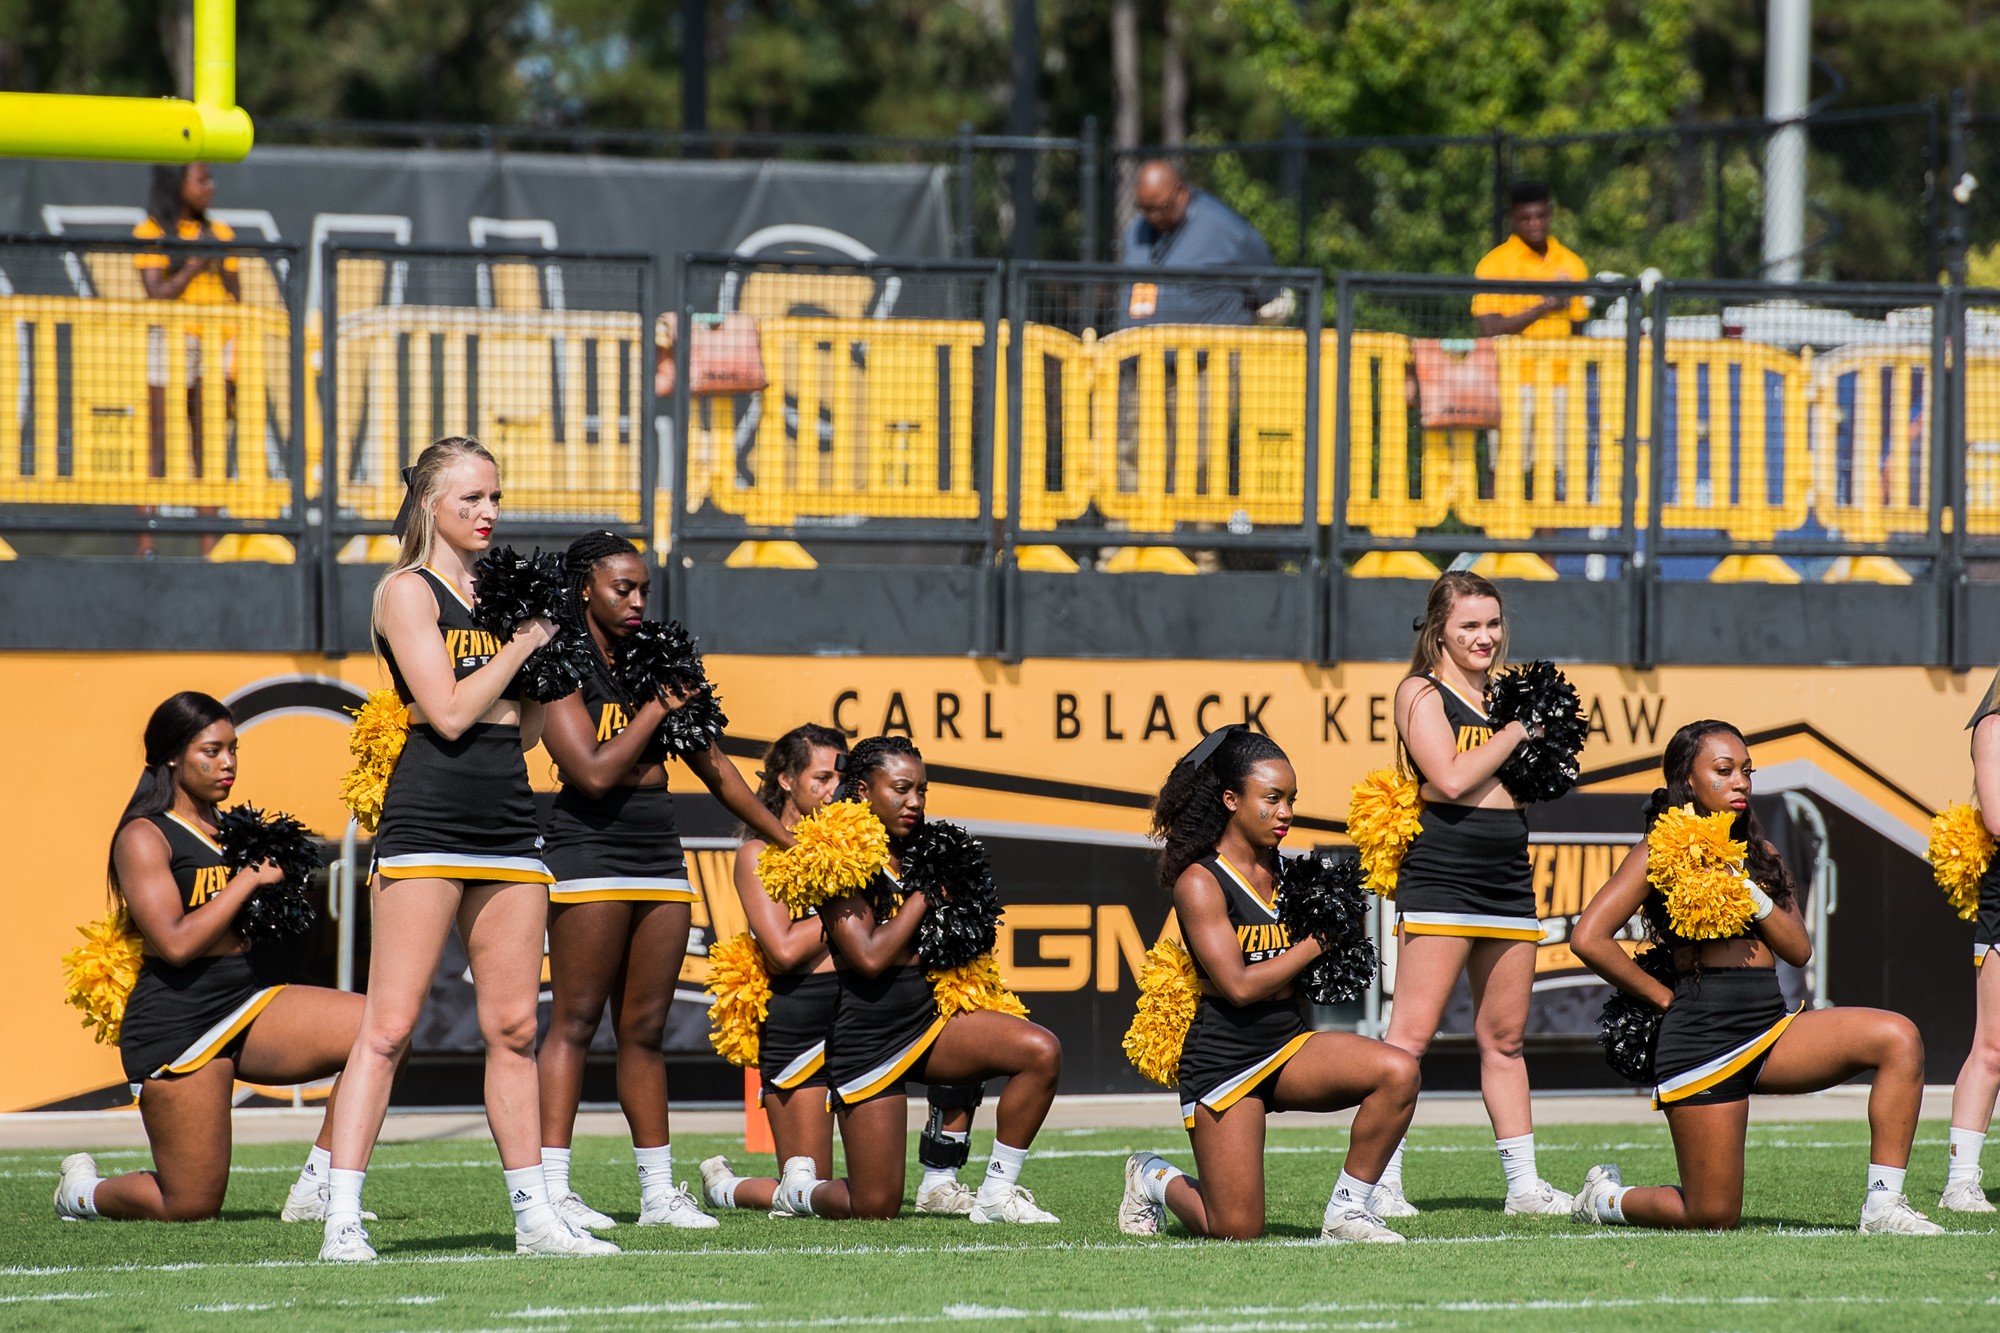 Cheerleaders absent from field after kneeling during anthem